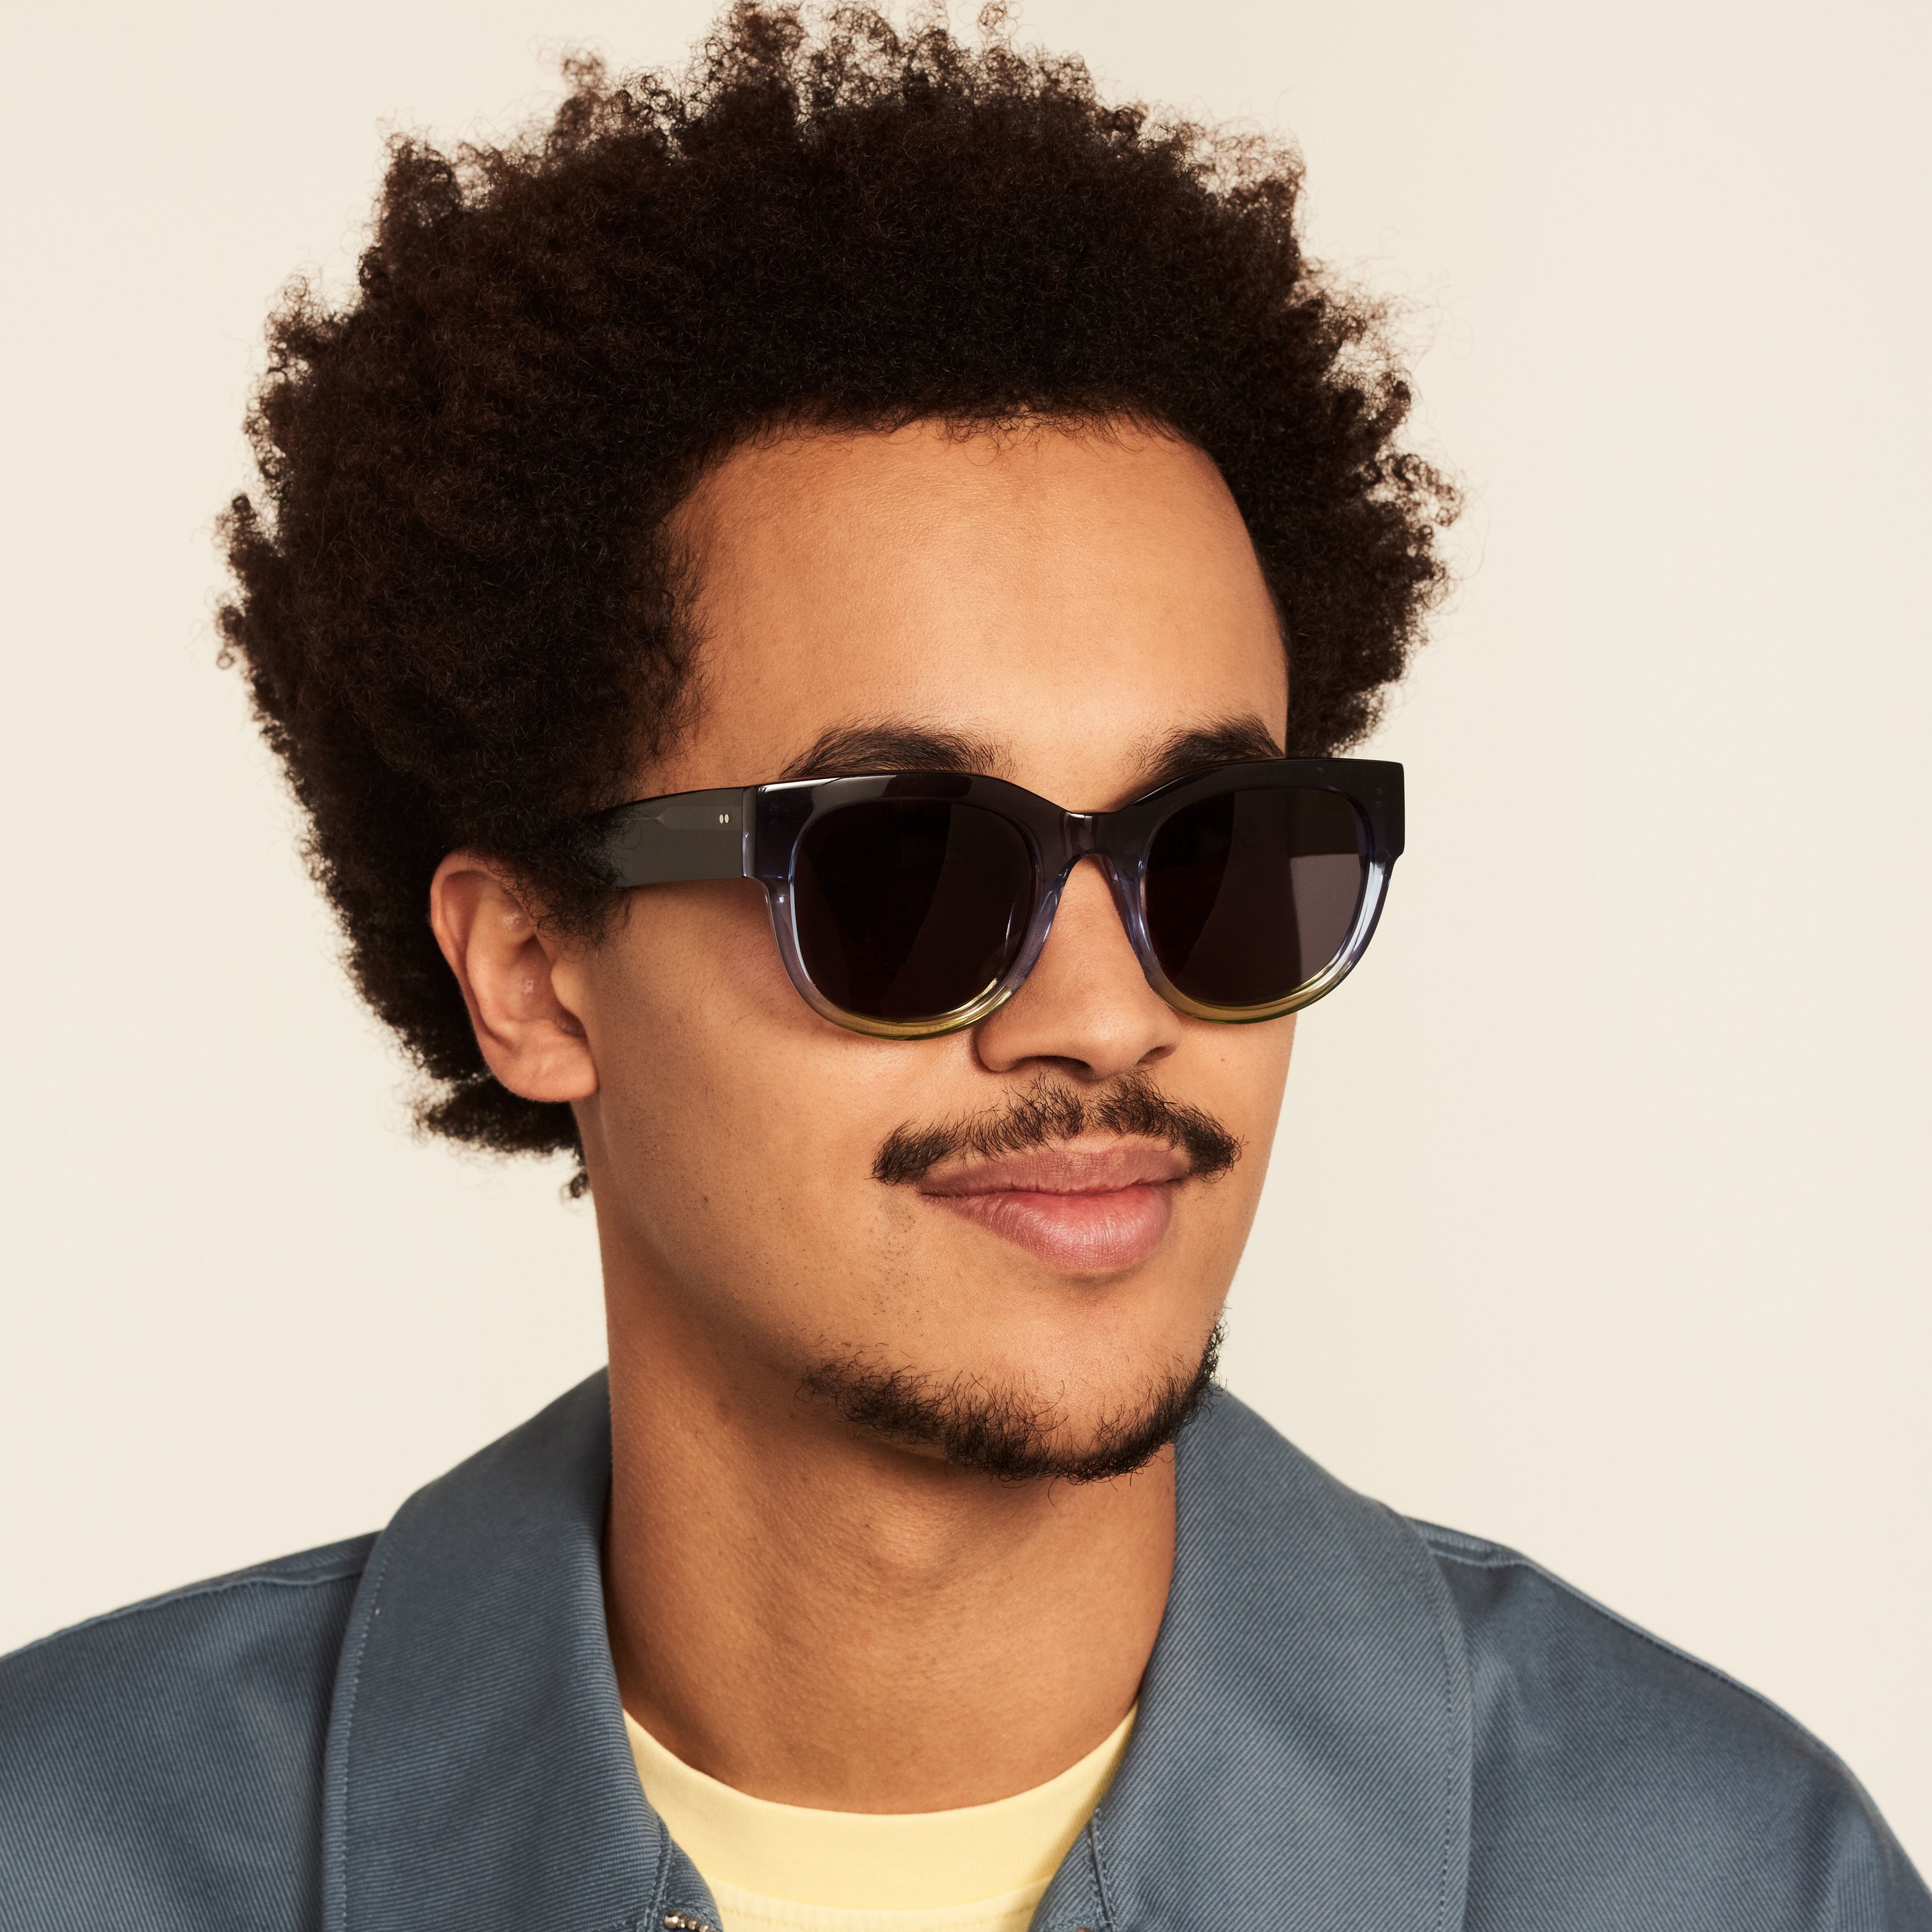 Ace & Tate Sunglasses | round acetate in Blue, Yellow